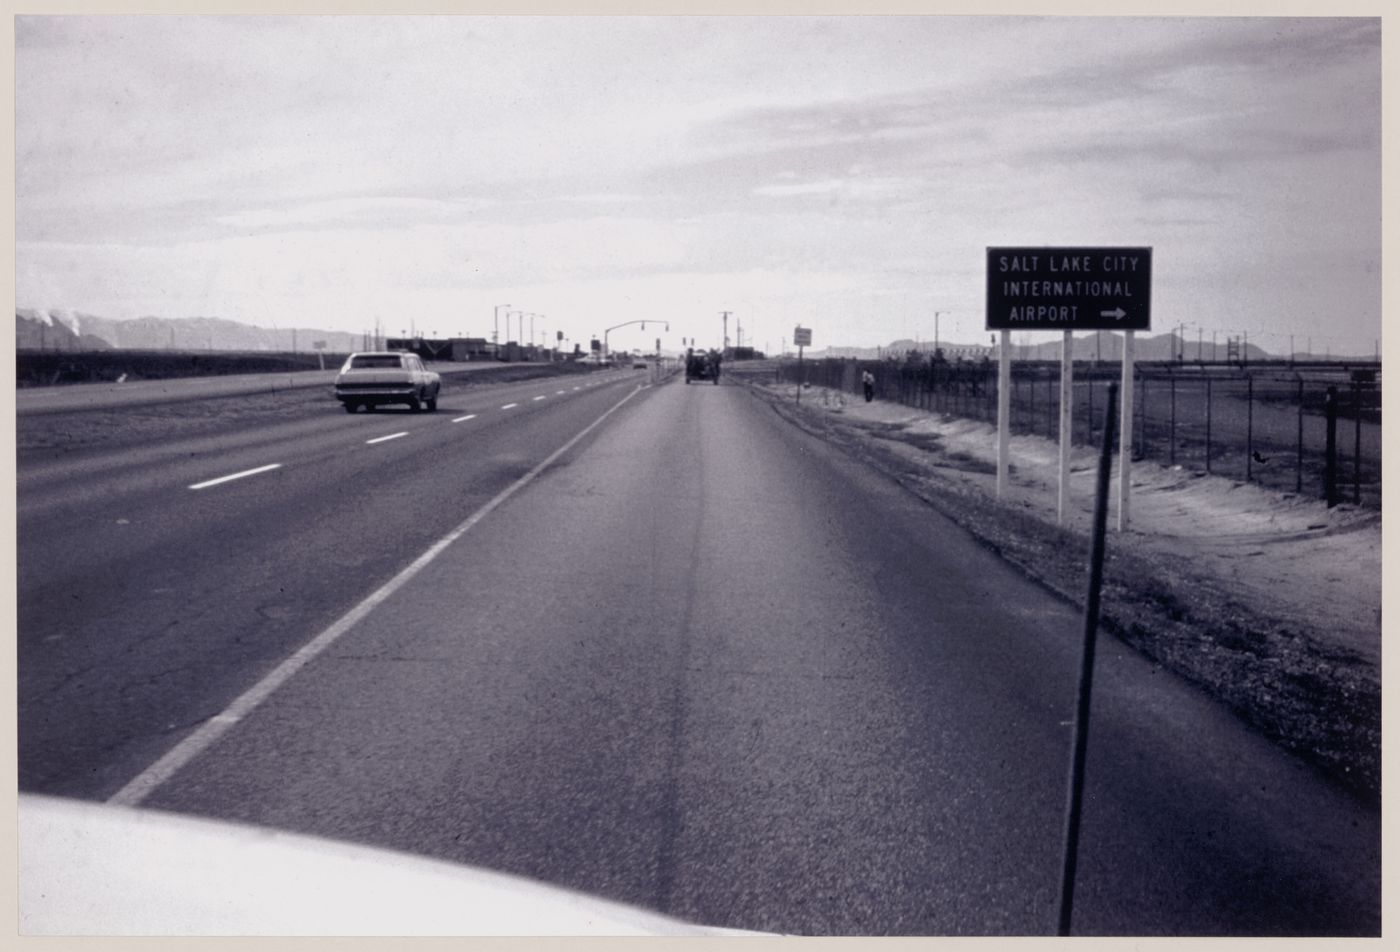 Photograph showing road near Salt Lake City International Airport for the Red Line project